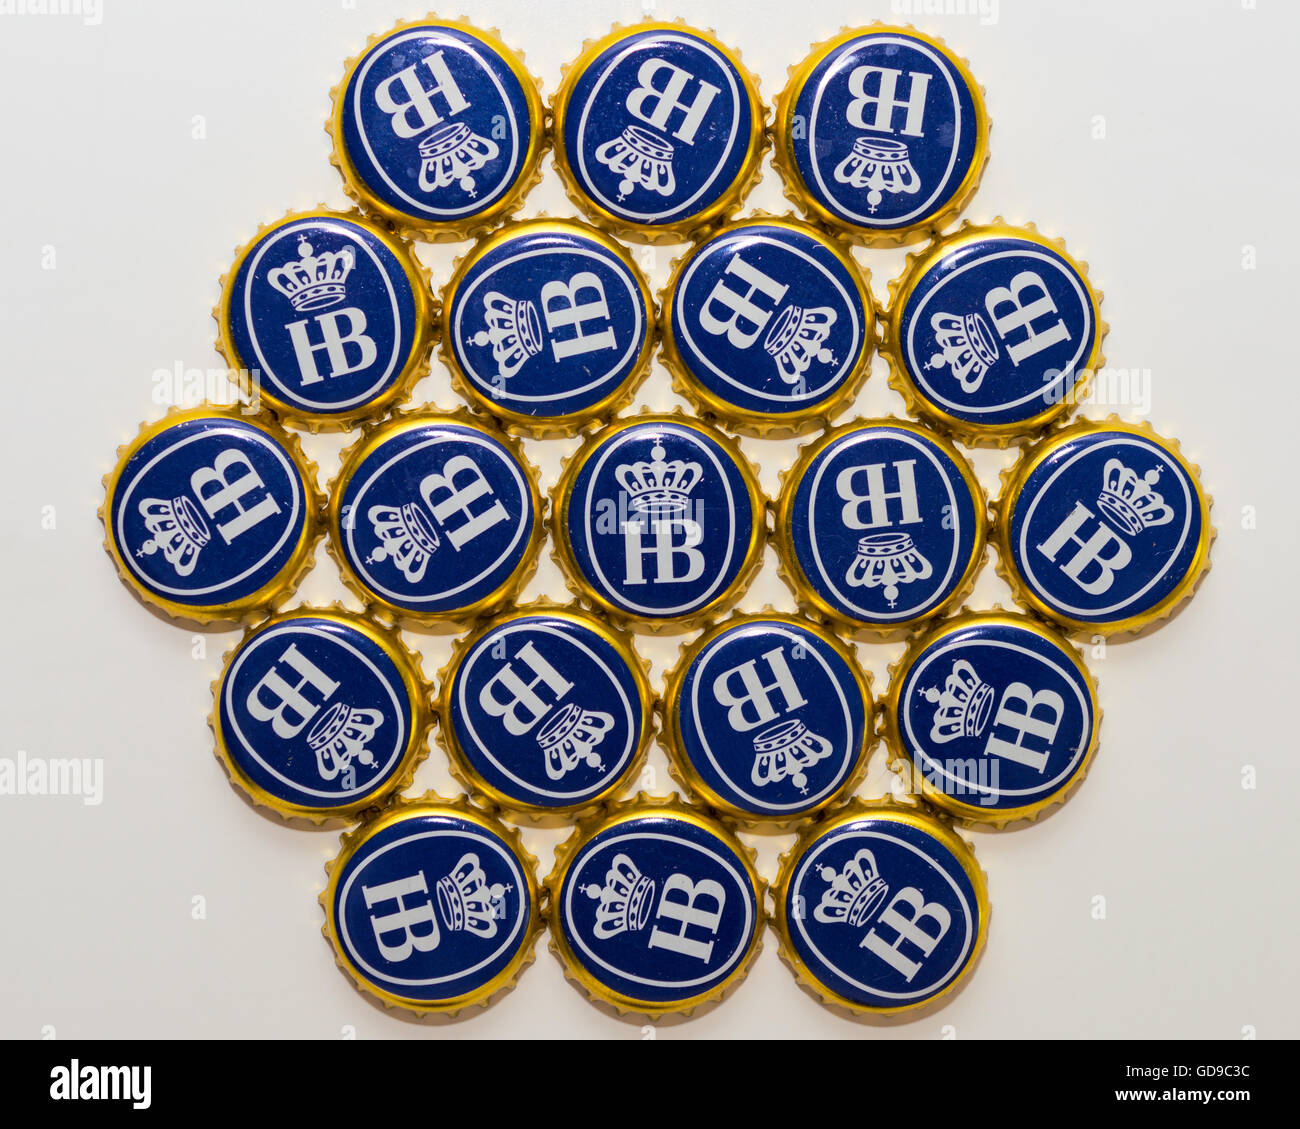 Many bottle caps of beer from Bavarian brewery Hofbrau Munich Stock Photo